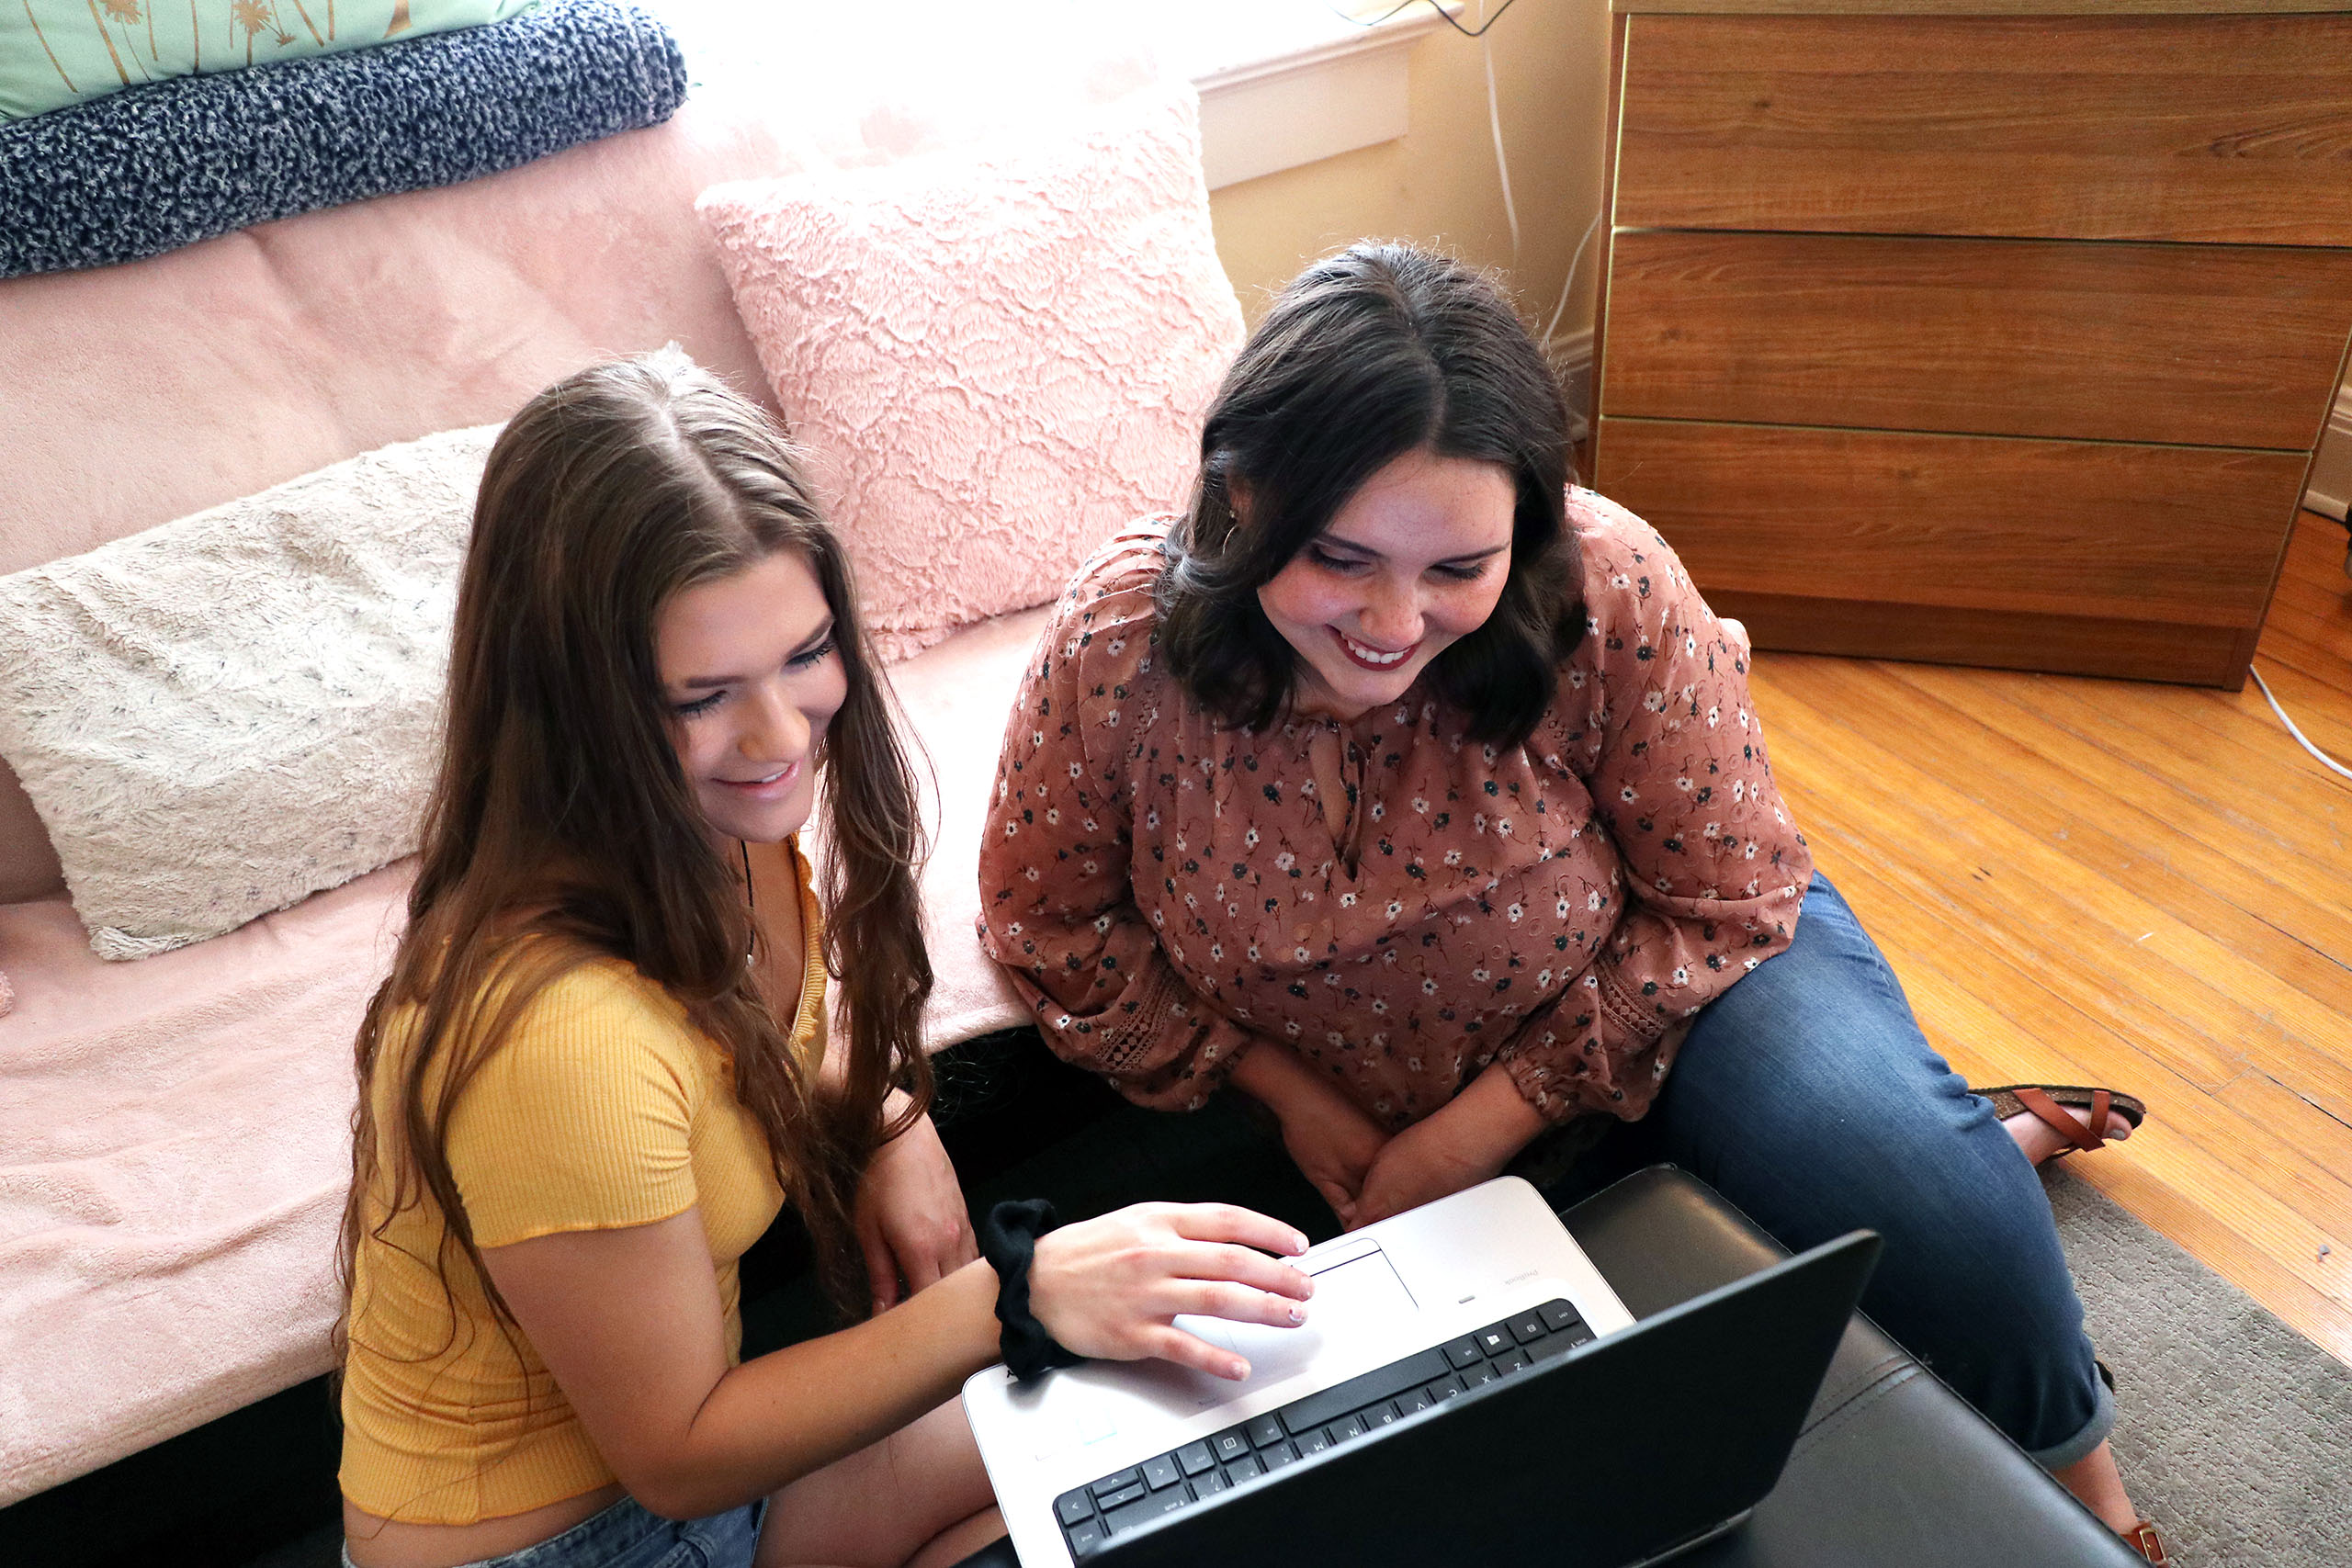 Two students sitting together on the floor looking at a laptop in a dorm room